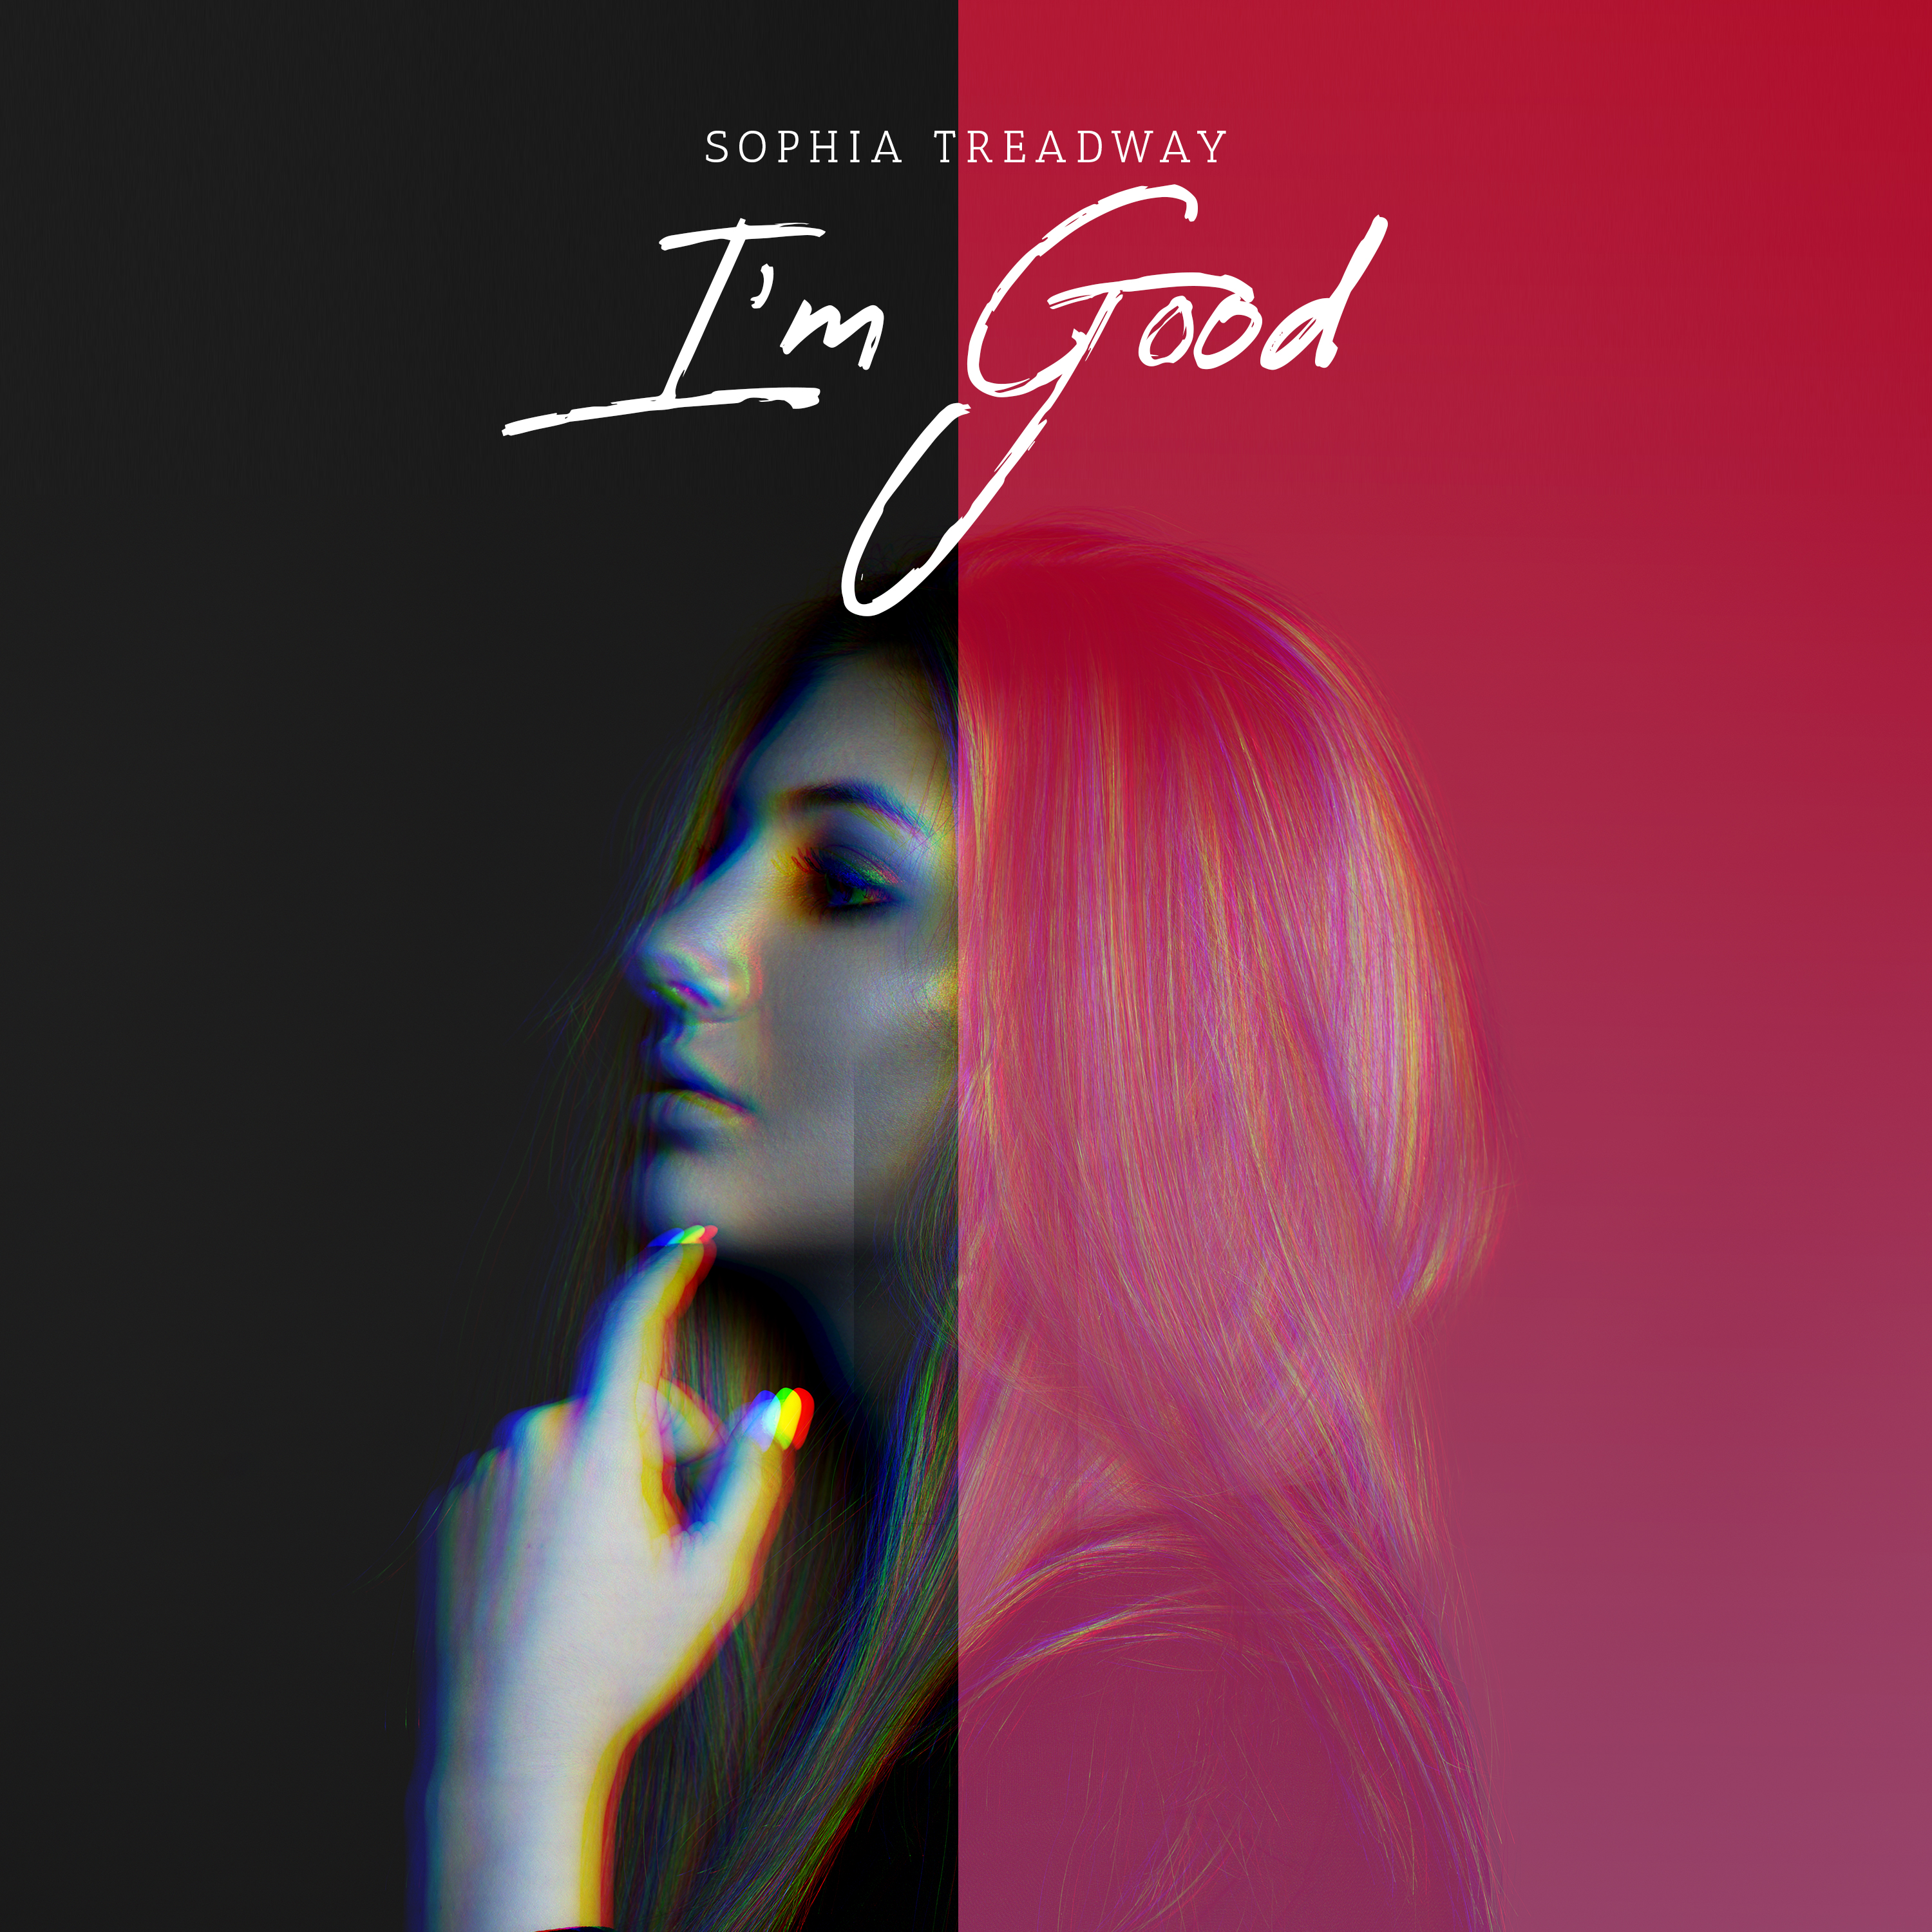 Sophia Treadway Sounds So Unbothered In “I’m Good”